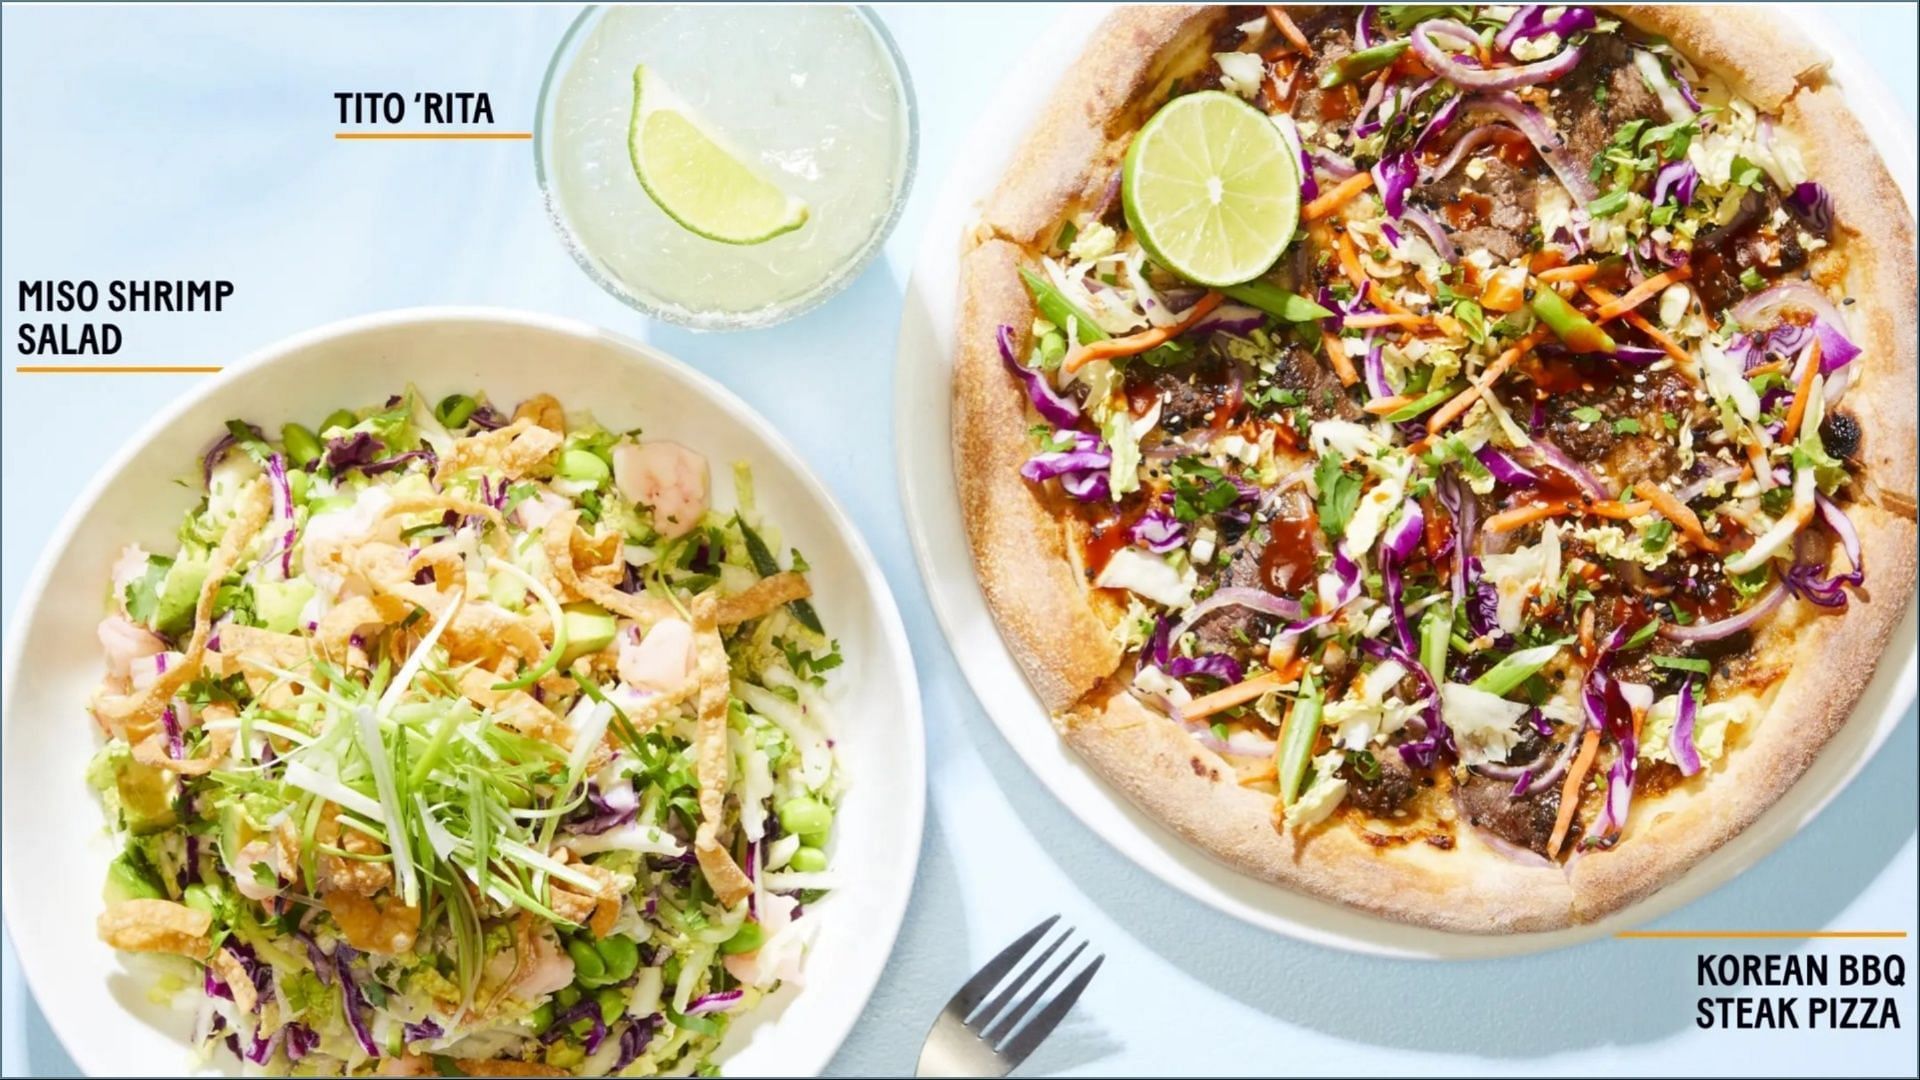 The seasonal menu is available nationwide until March 25 (Image via California Pizza Kitchen)